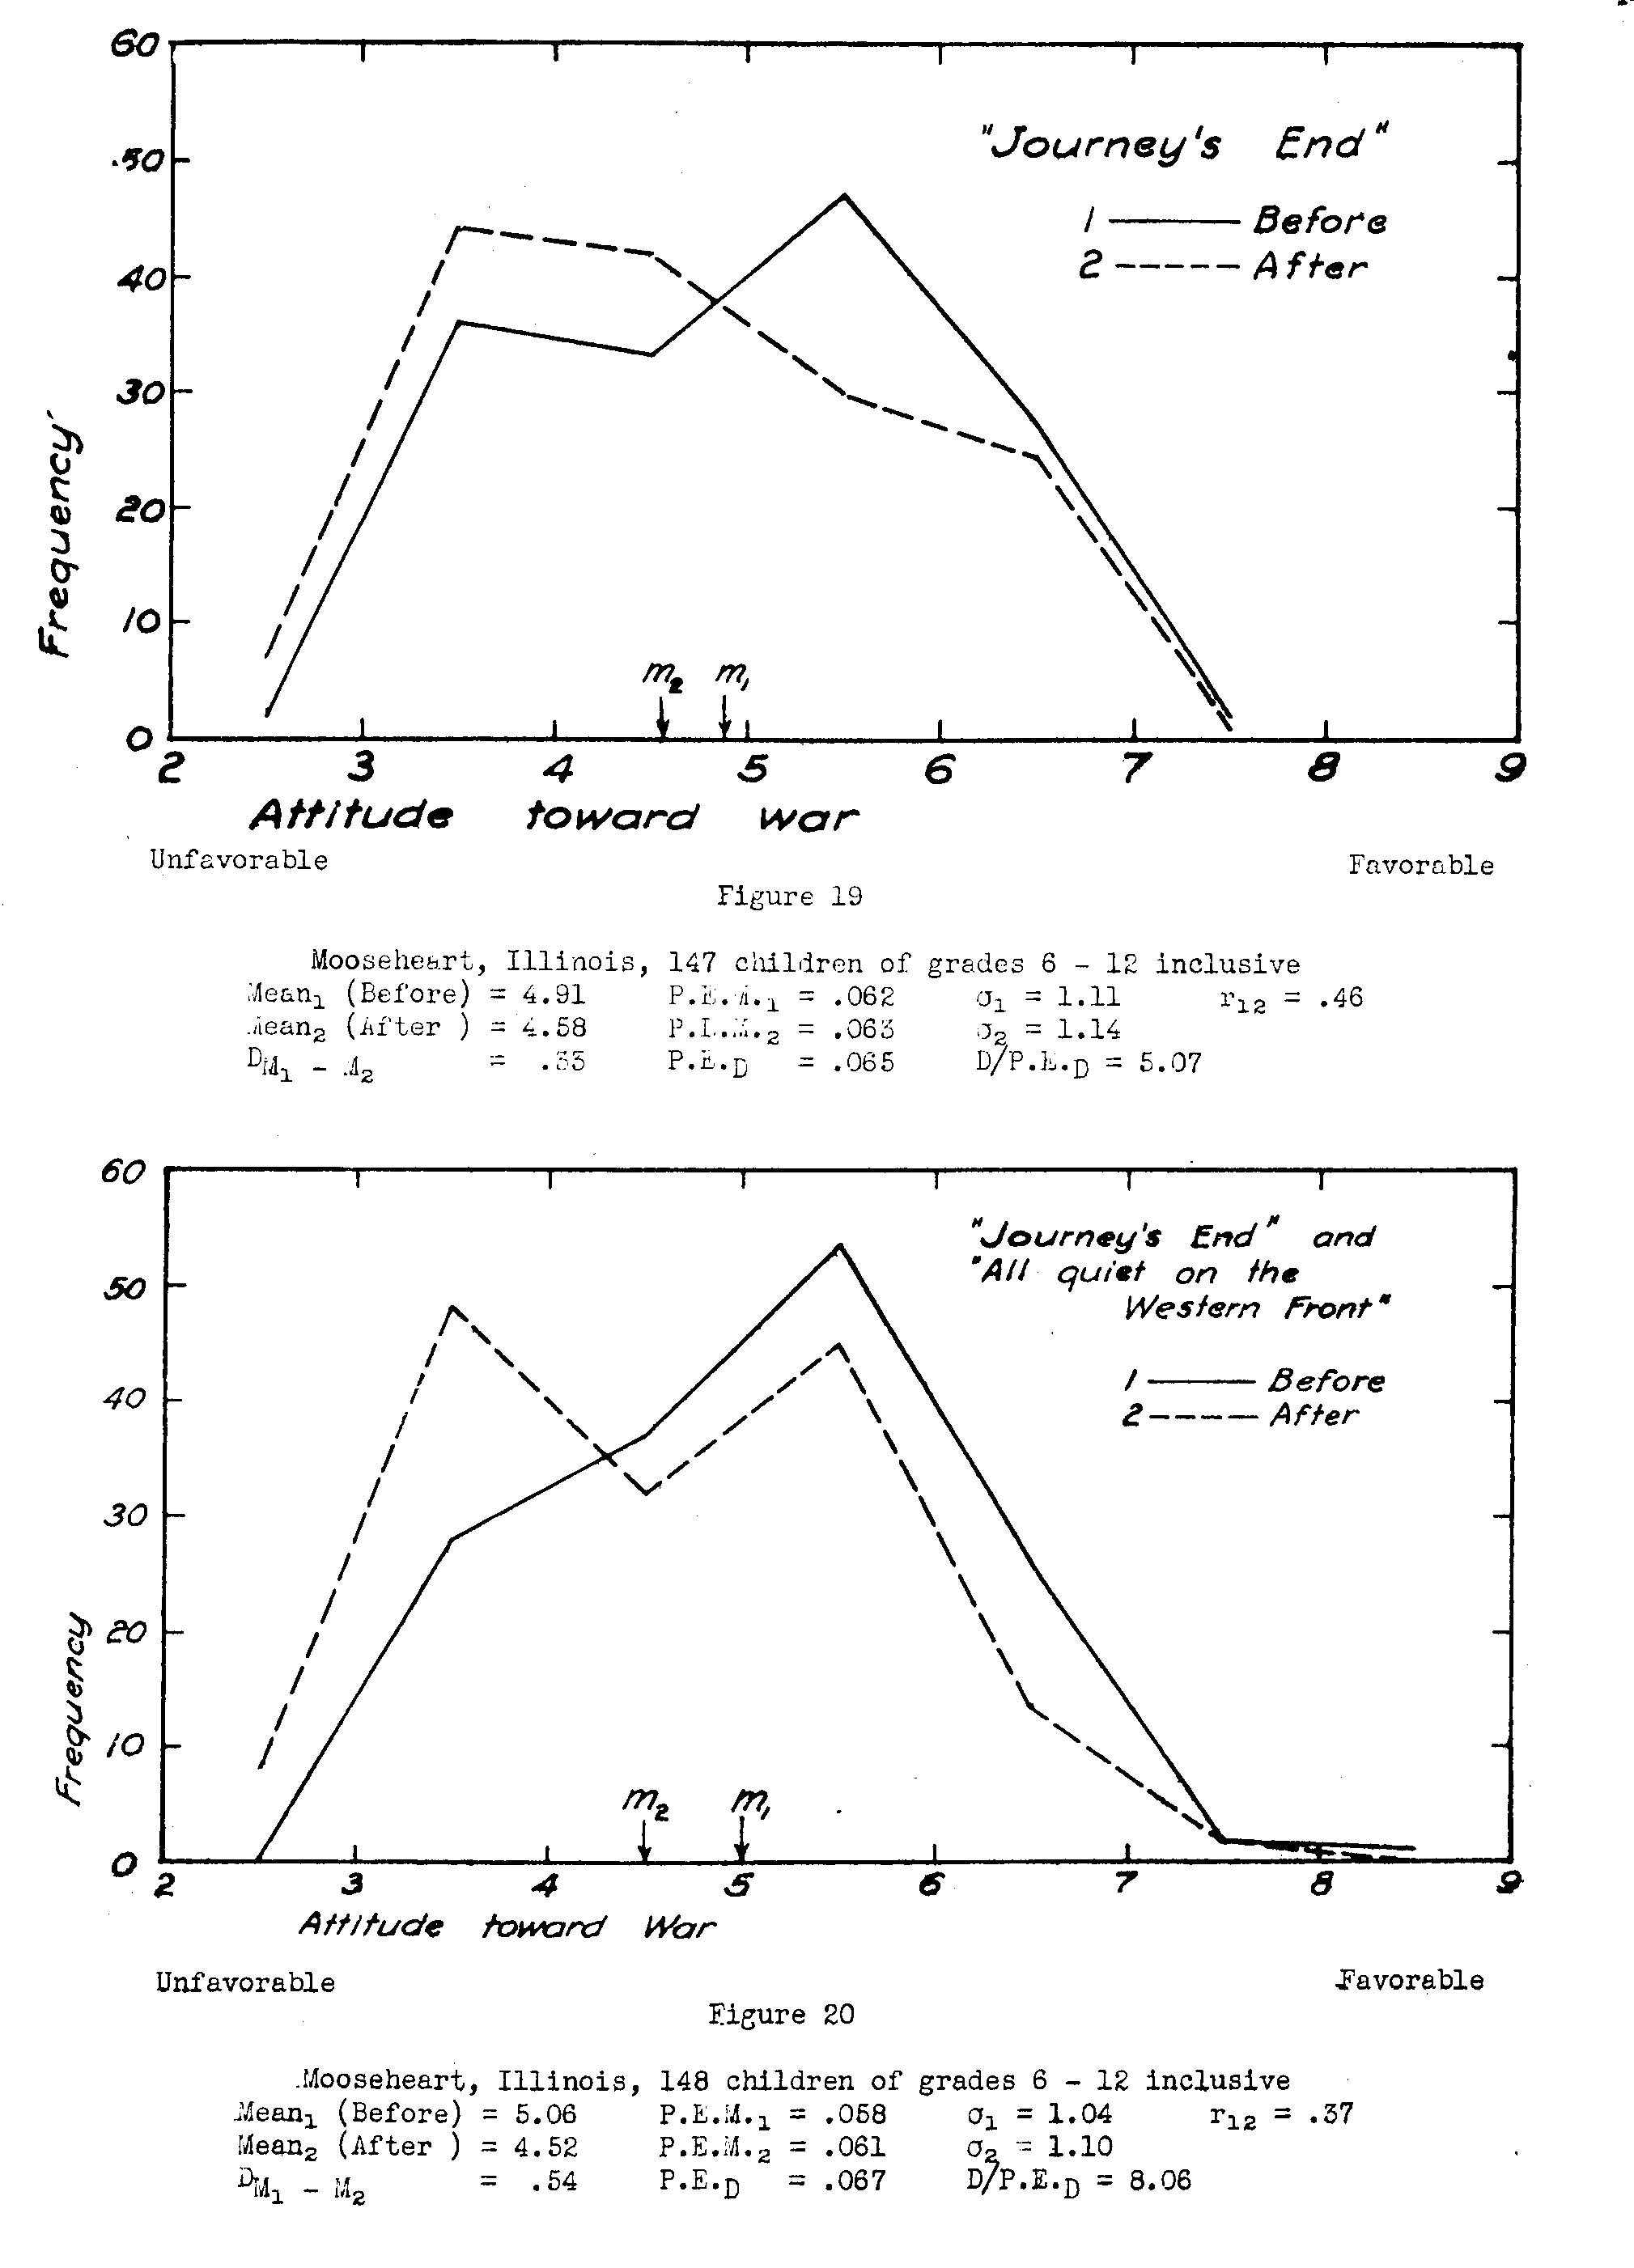 Figure 19, Attitude Toward War, before and after Journey's End